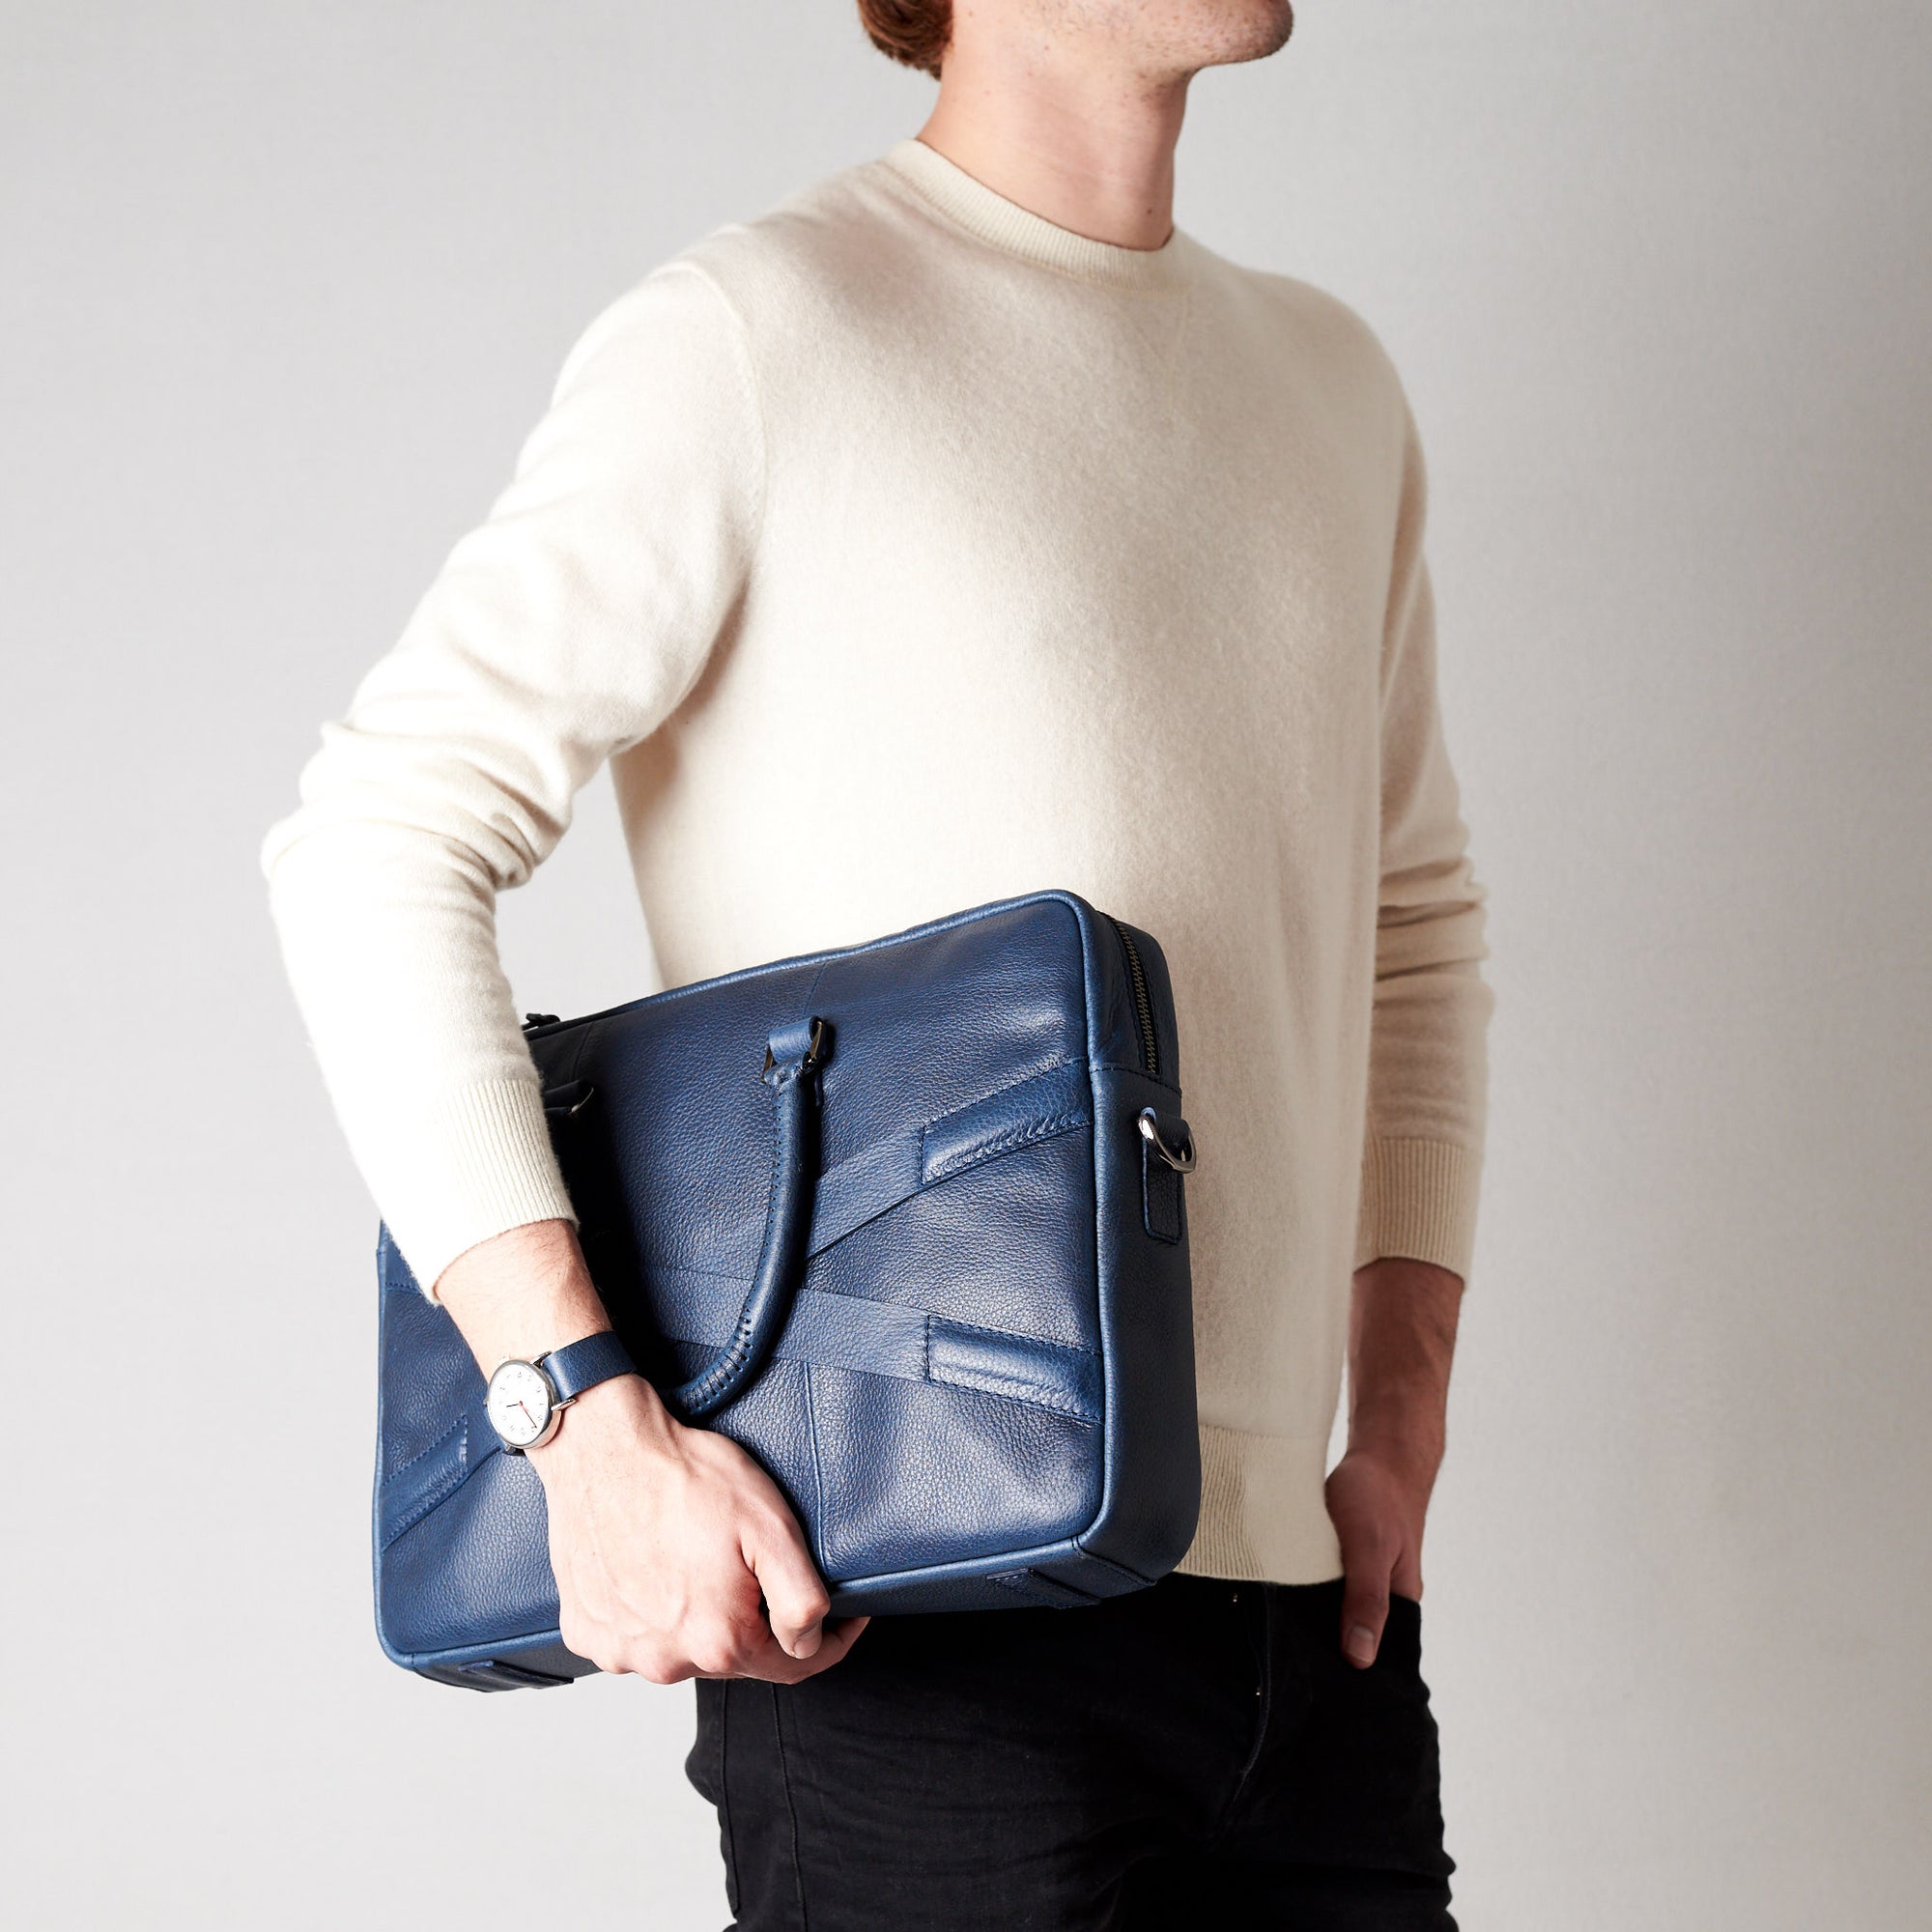 Style side view of model holding workbag. Blue leather briefcase laptop bag for men. Gazeli laptop briefcase by Capra Leather.